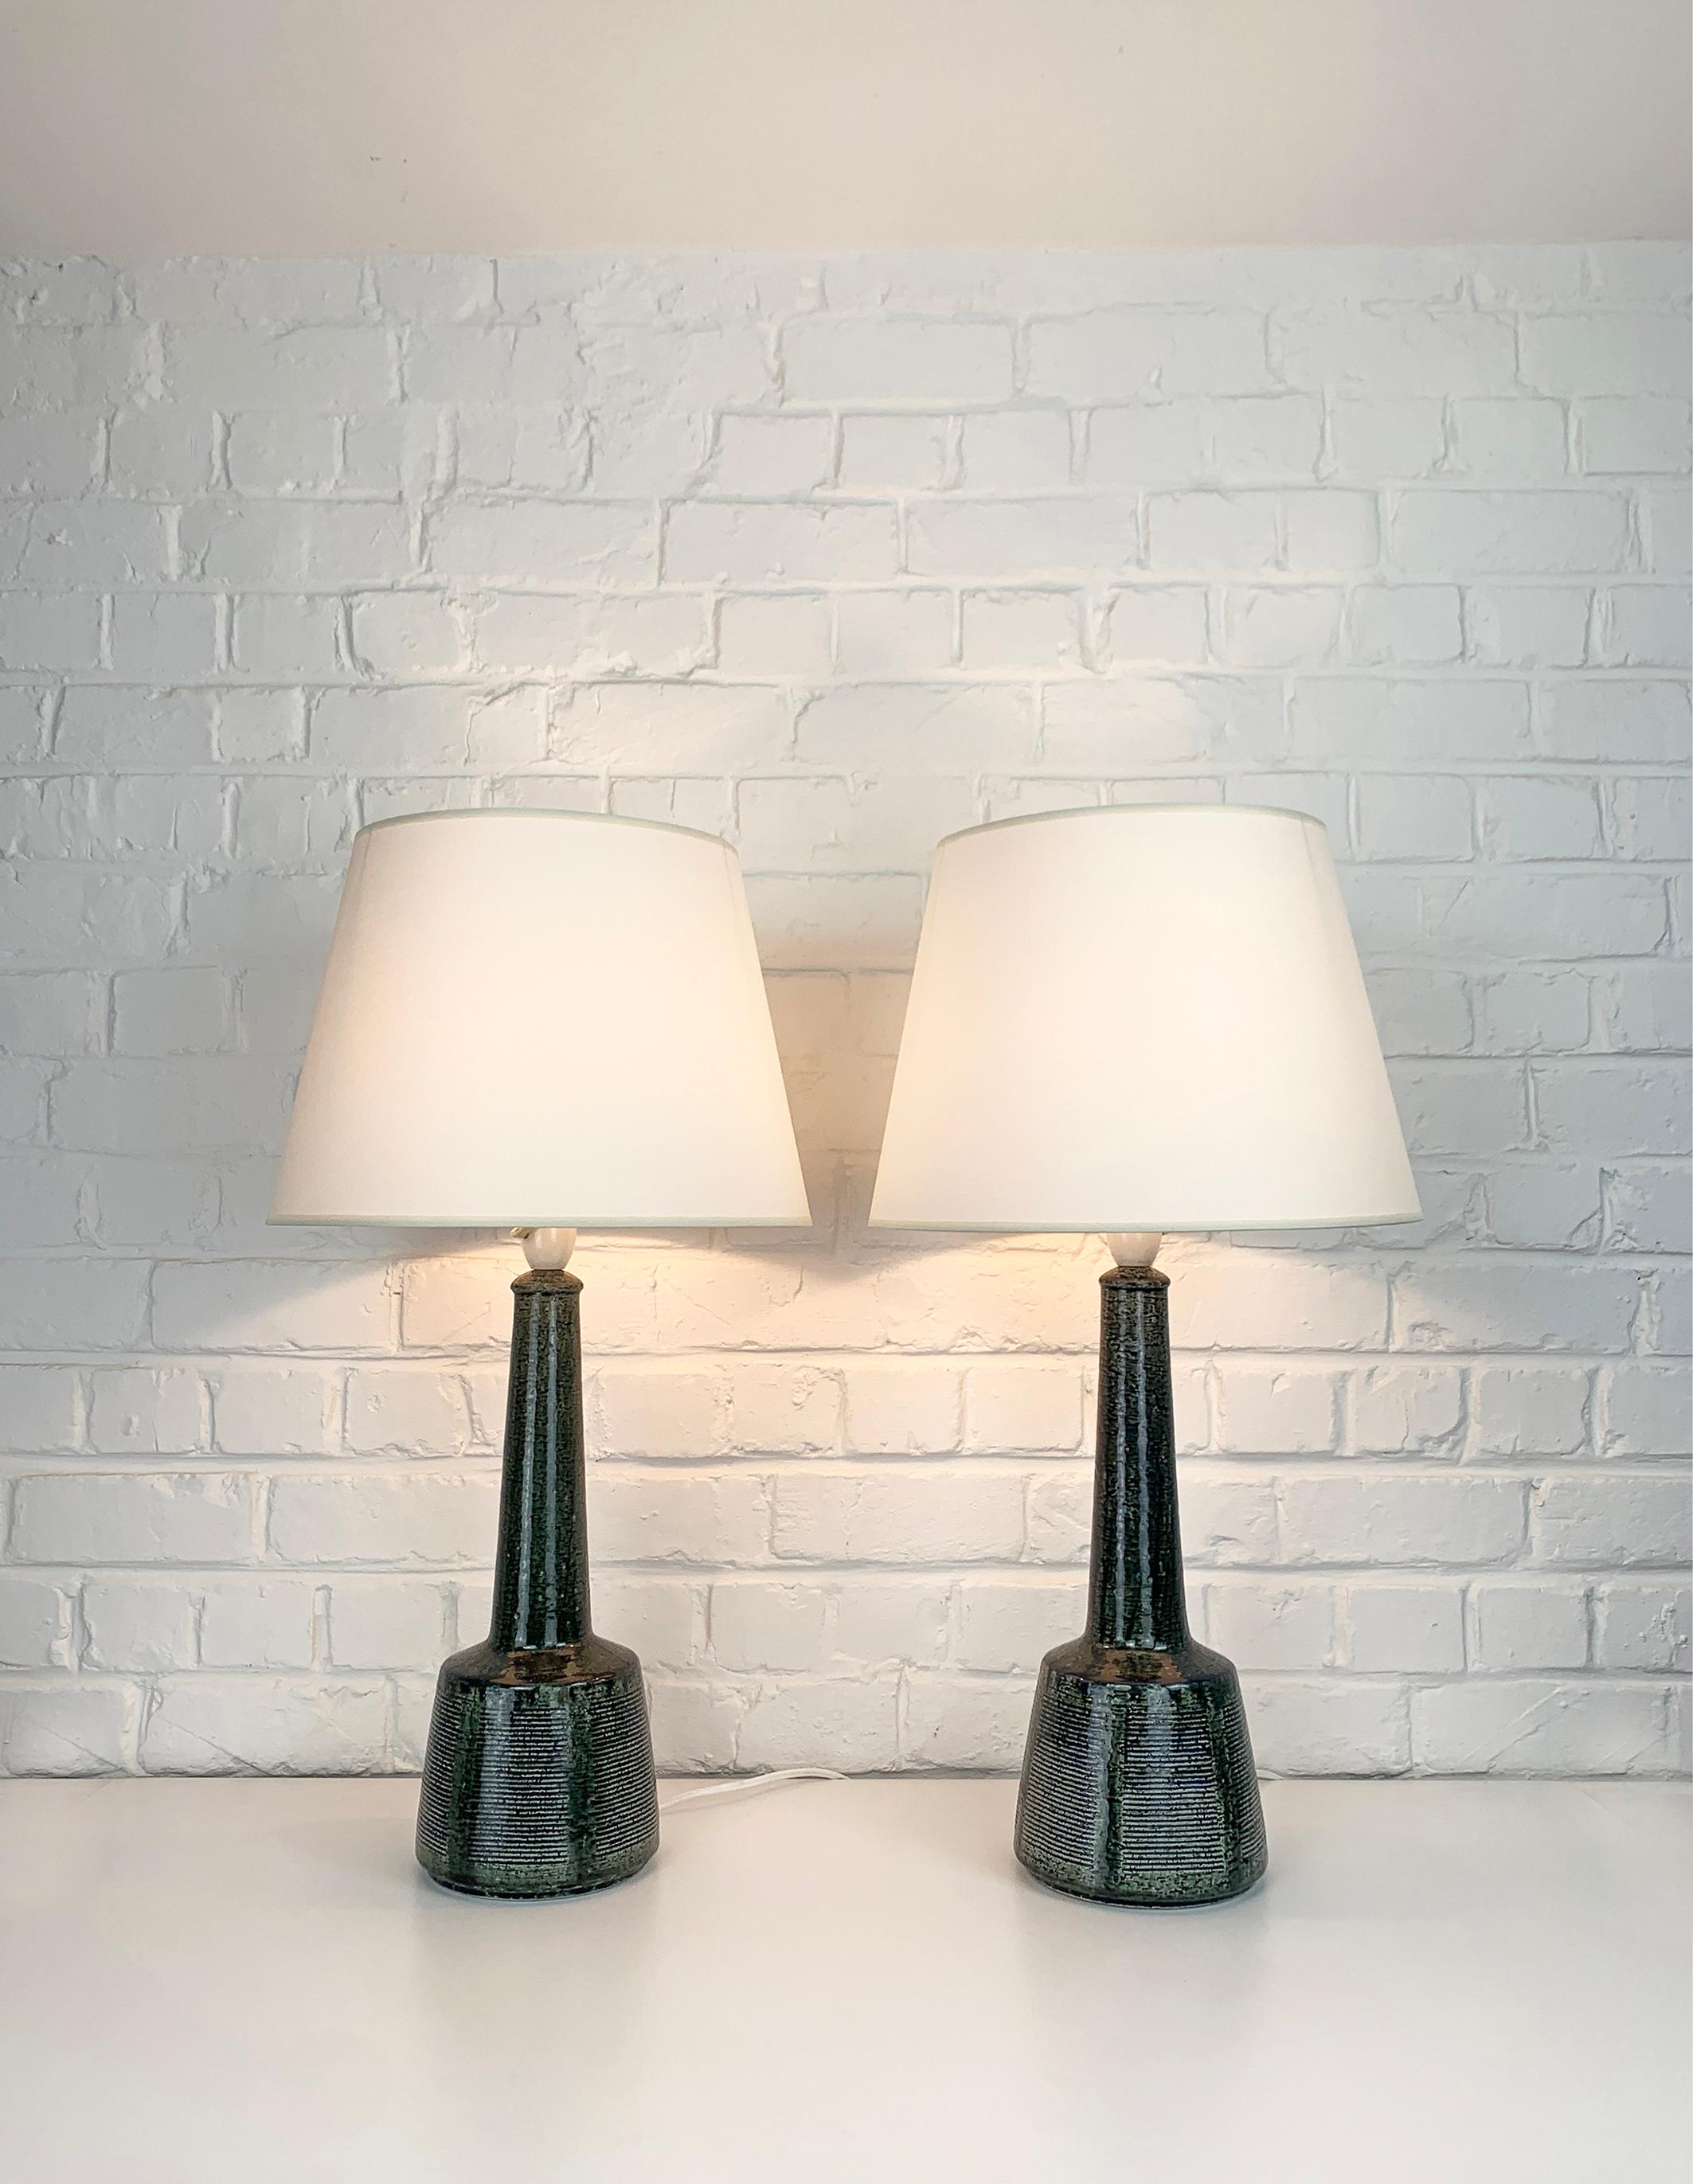 These lamps have been designed by Esben Klint, son of Kaare Klint (the famous danish furniture designer). Esben has created a timeless design with this model, it has a contemporary and graphic side despite being over 50 years old.

These lamps have